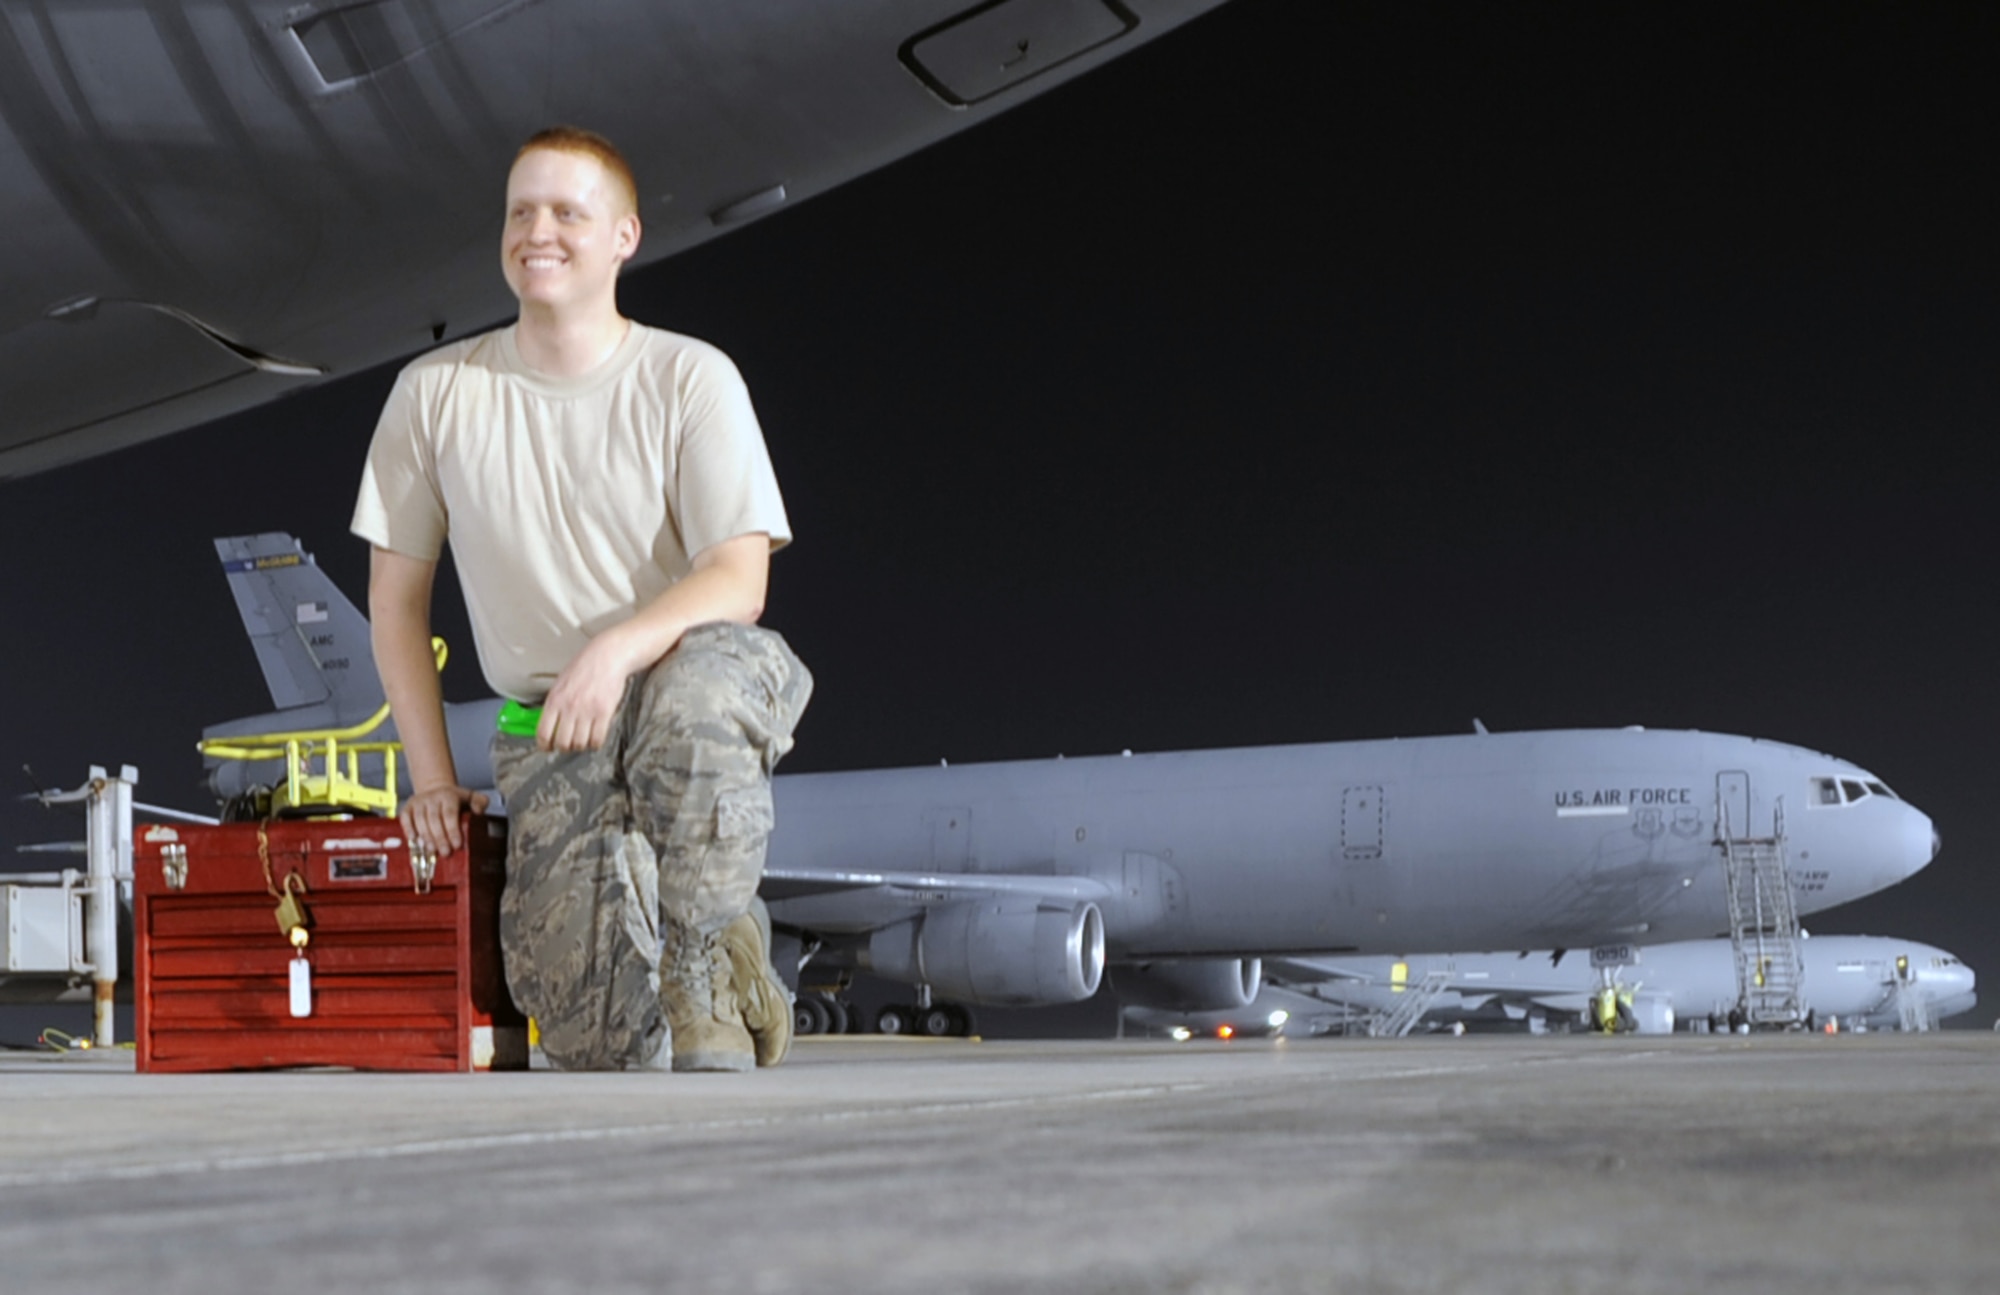 Airman 1st Class Garret Coleman is a KC-10 Extender maintenance Airman with the 380th Expeditionary Aircraft Maintenance Squadron at a non-disclosed base in Southwest Asia. Here he is pictured on Jan. 31, 2010.  Airman Coleman is deployed from the 605th Aircraft Maintenance Squadron at Joint Base McGuire-Dix-Lakehurst, N.J., and his hometown is Springfield, Mo.  (U.S. Air Force Photo/Master Sgt. Scott T. Sturkol/Released)